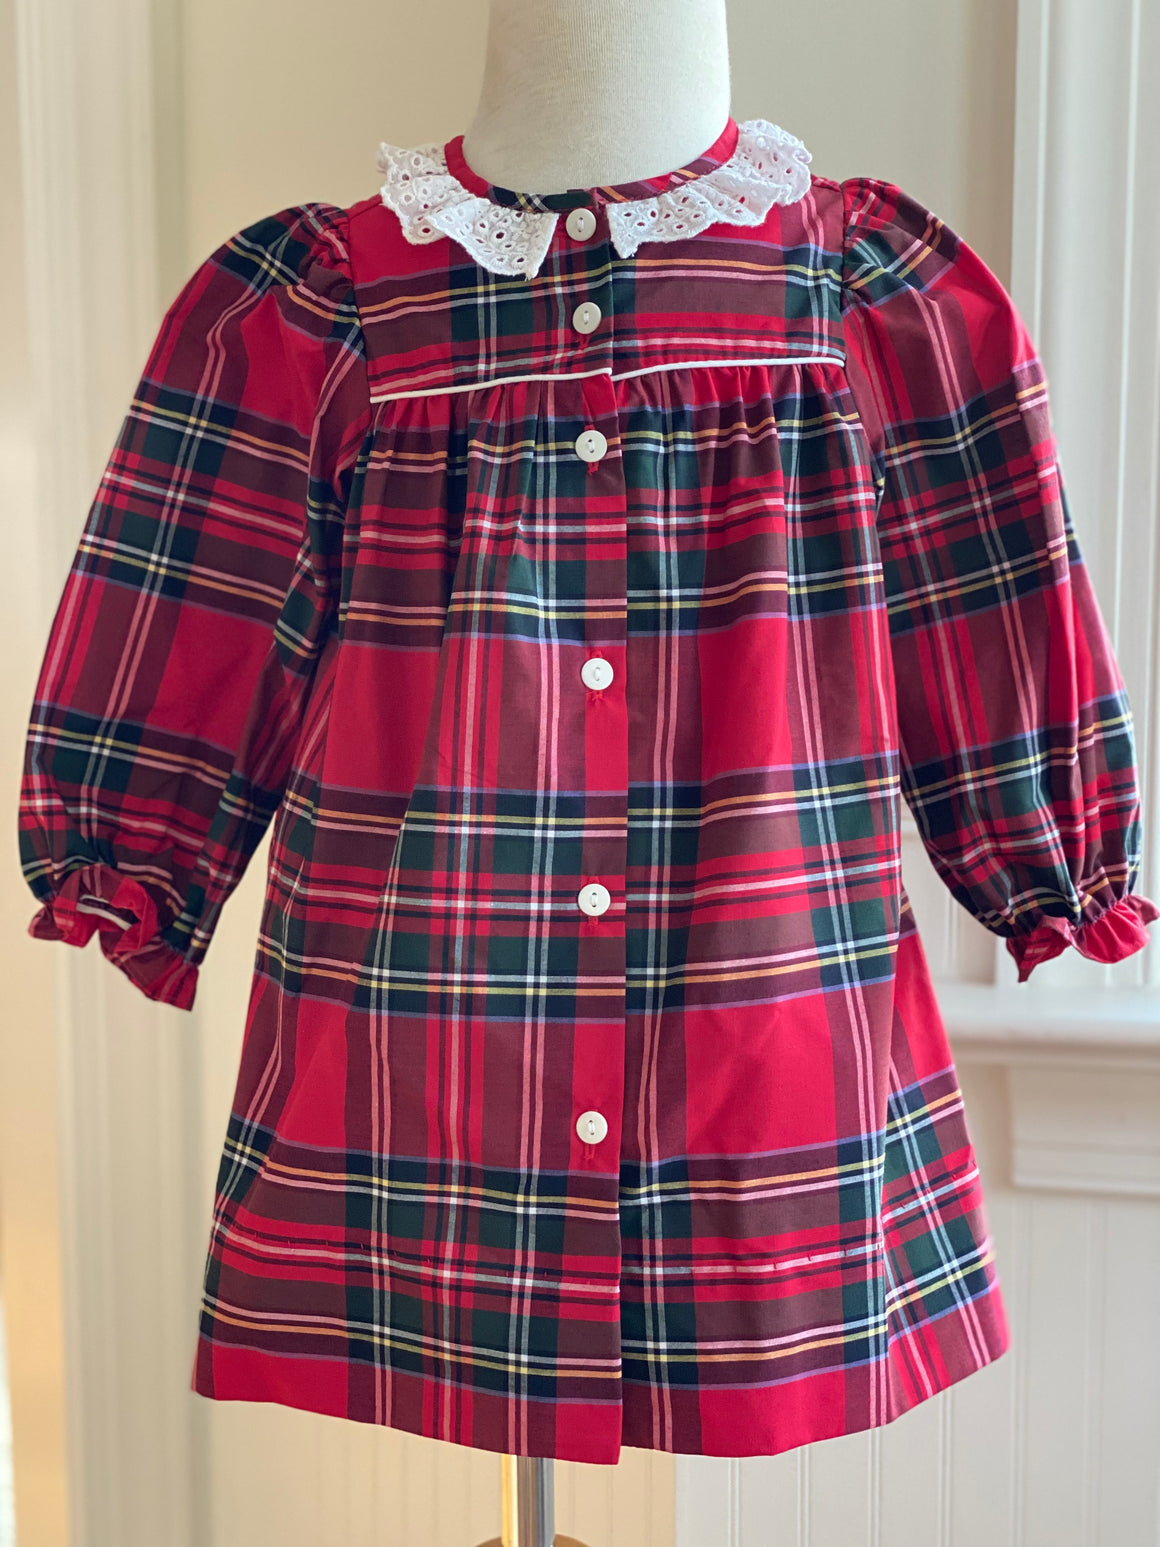 Jolly Plaid Girl Dress (bonus bloomers with size 2t - 4t)